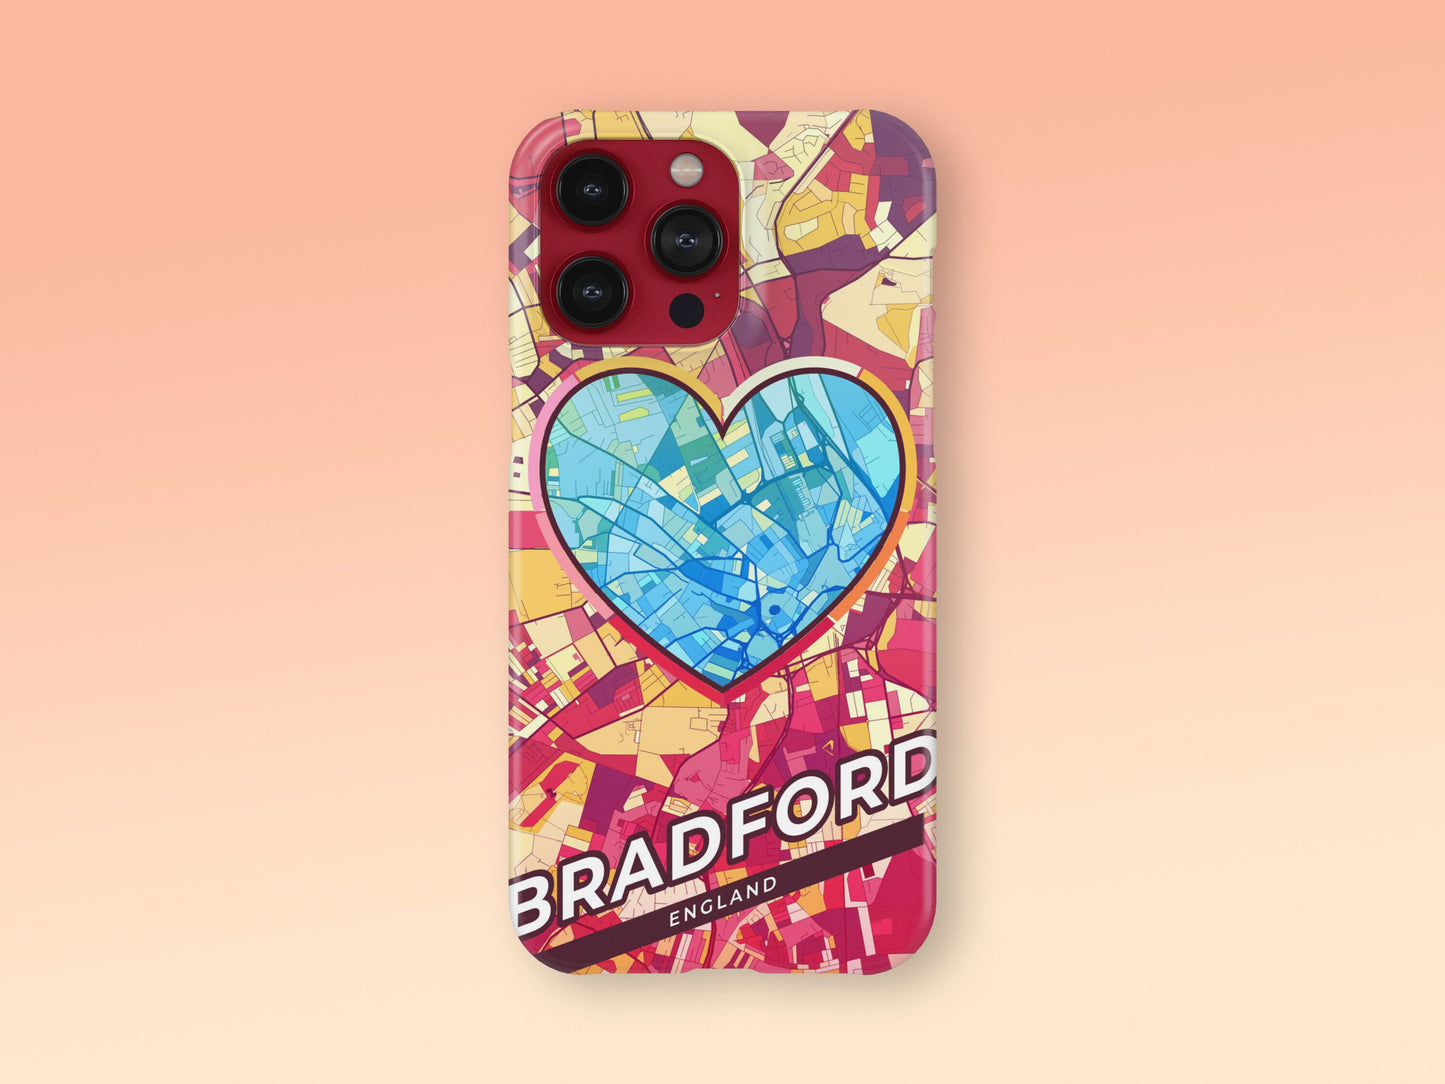 Bradford England slim phone case with colorful icon. Birthday, wedding or housewarming gift. Couple match cases. 2